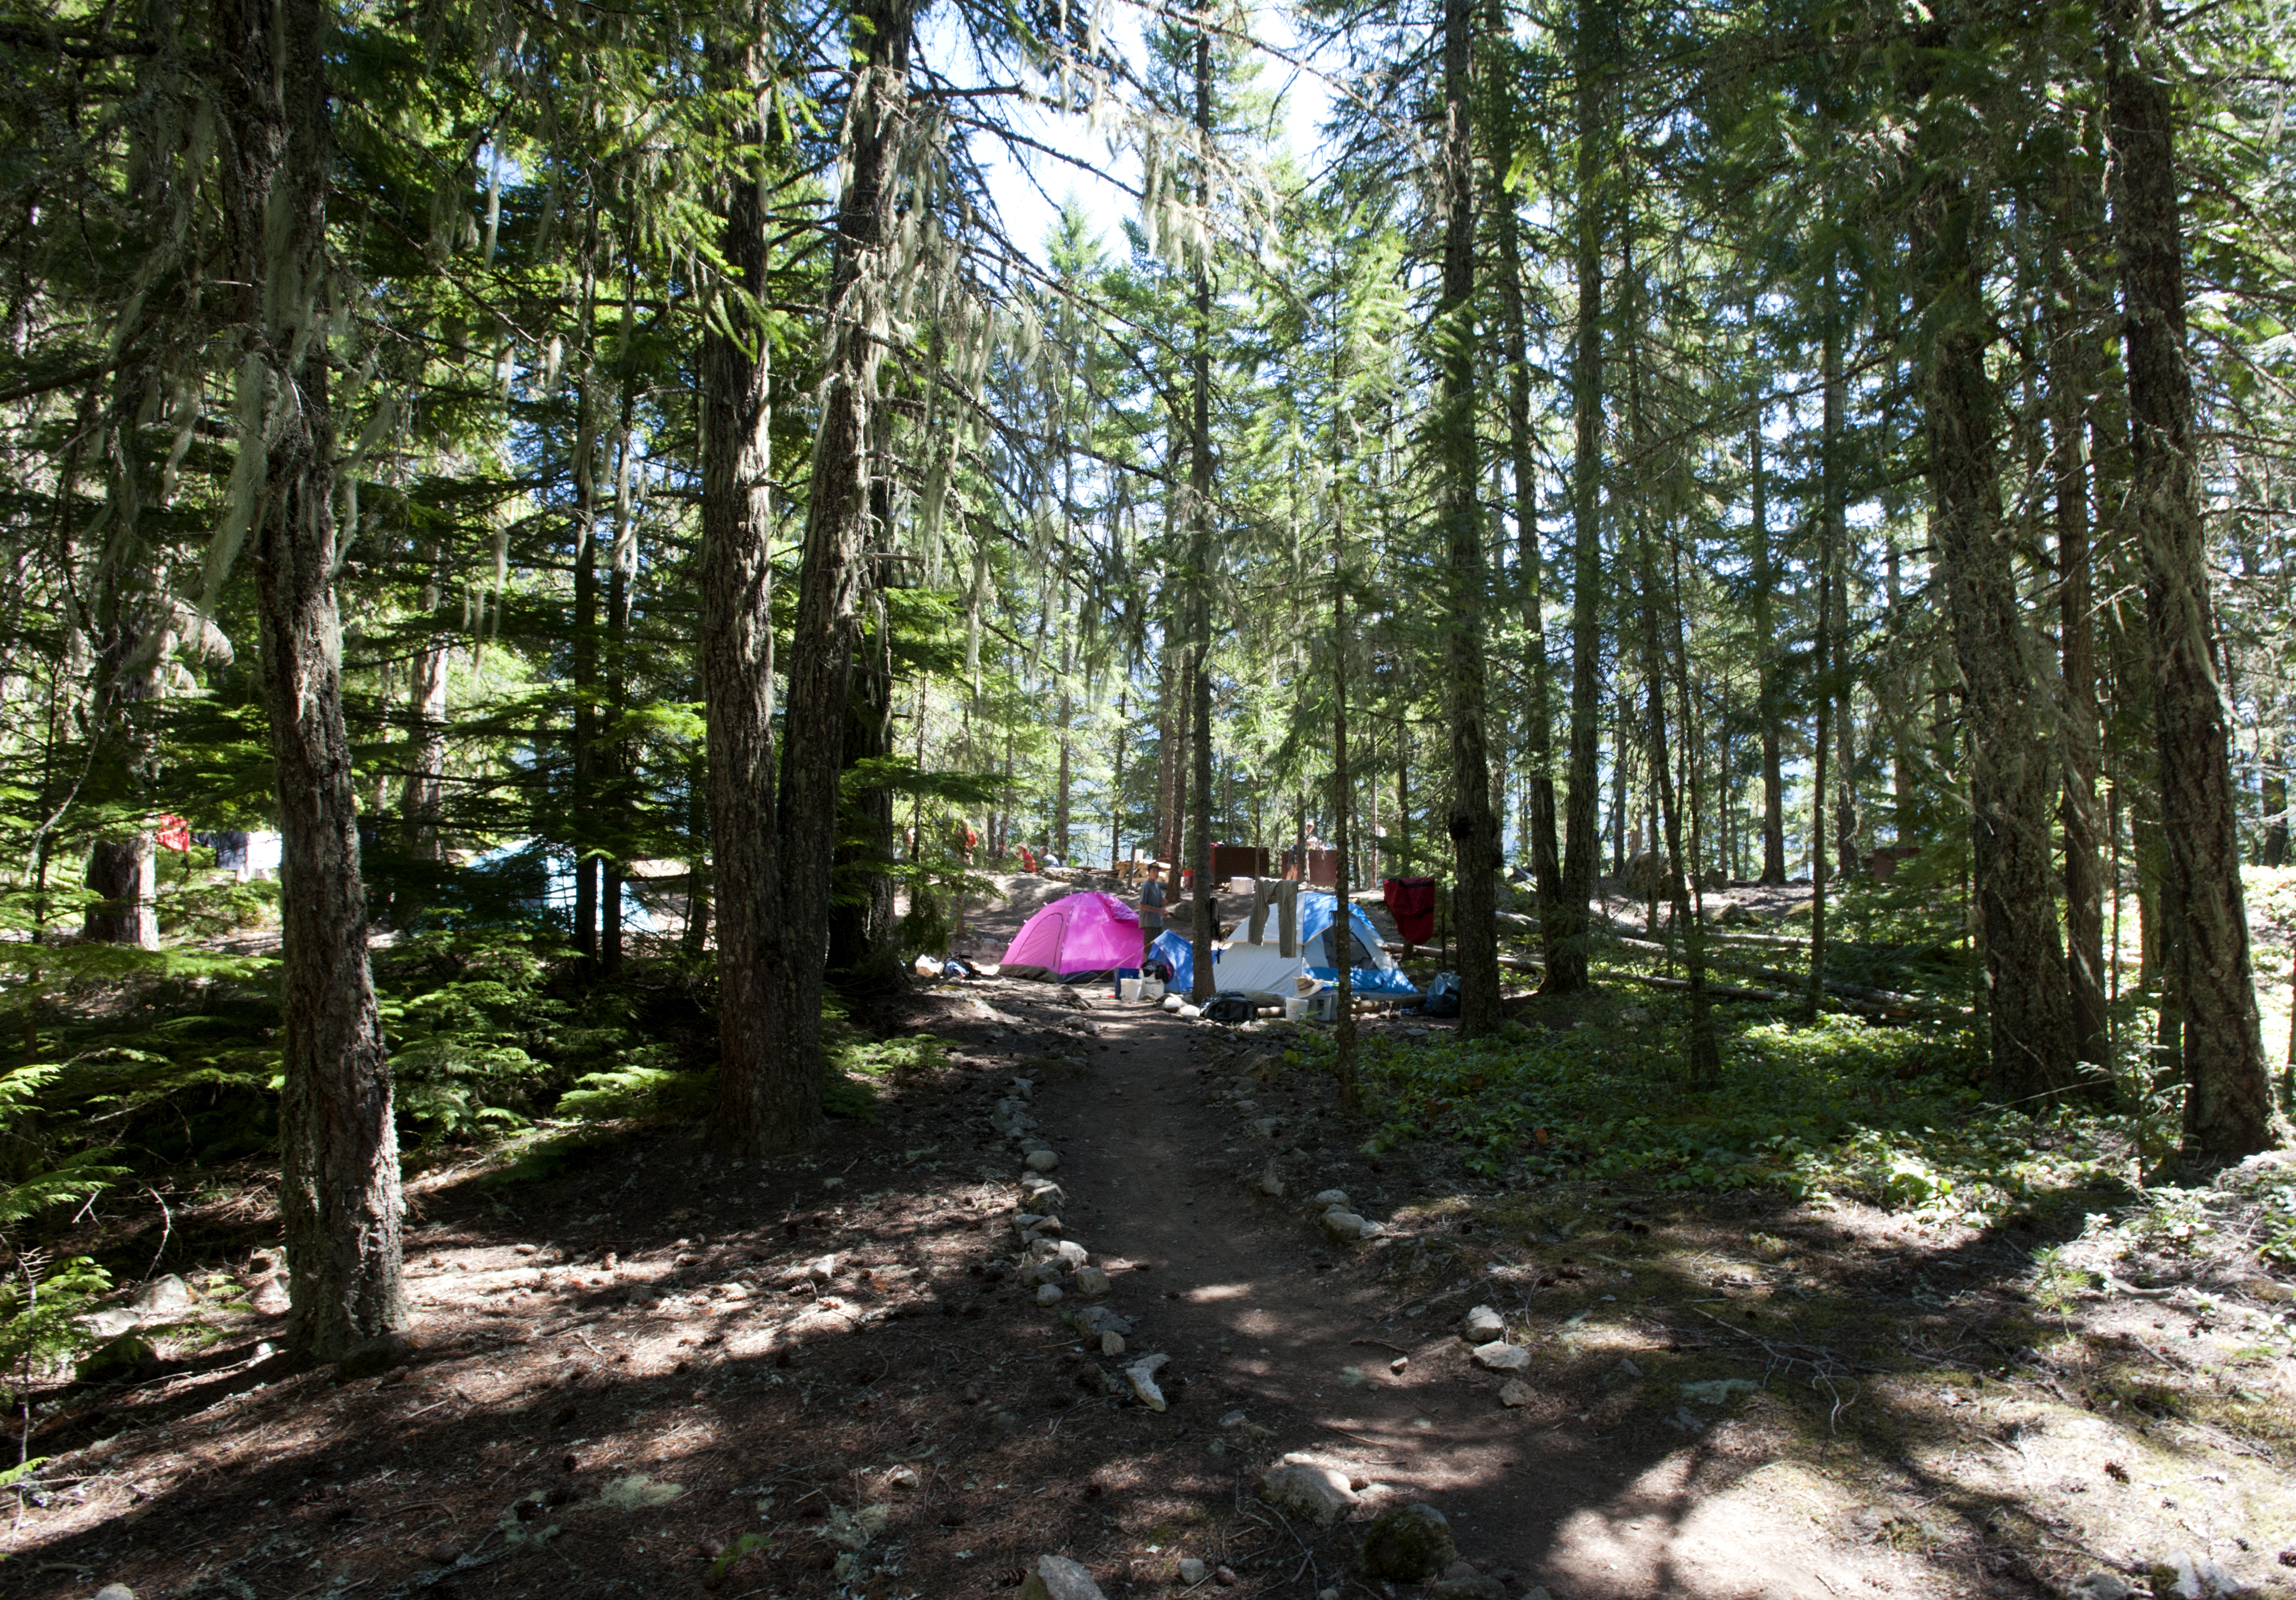 Tents set up in a wooded area.